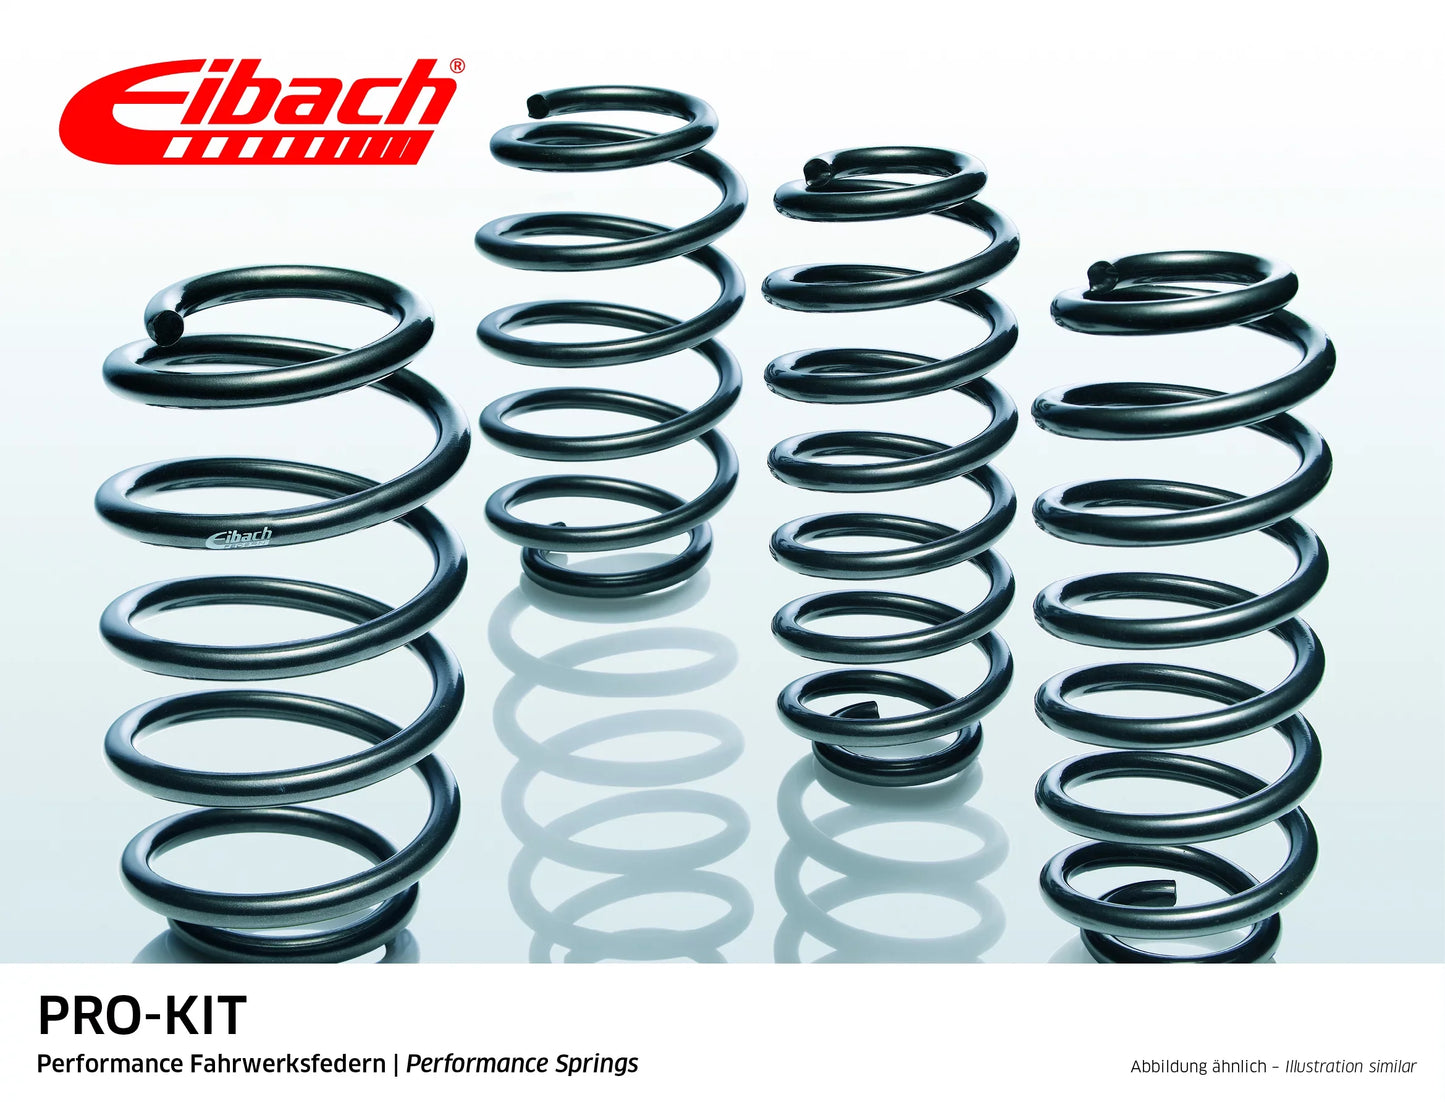 Eibach Pro-Kit Lowering Springs (E7023-120) at £146.71